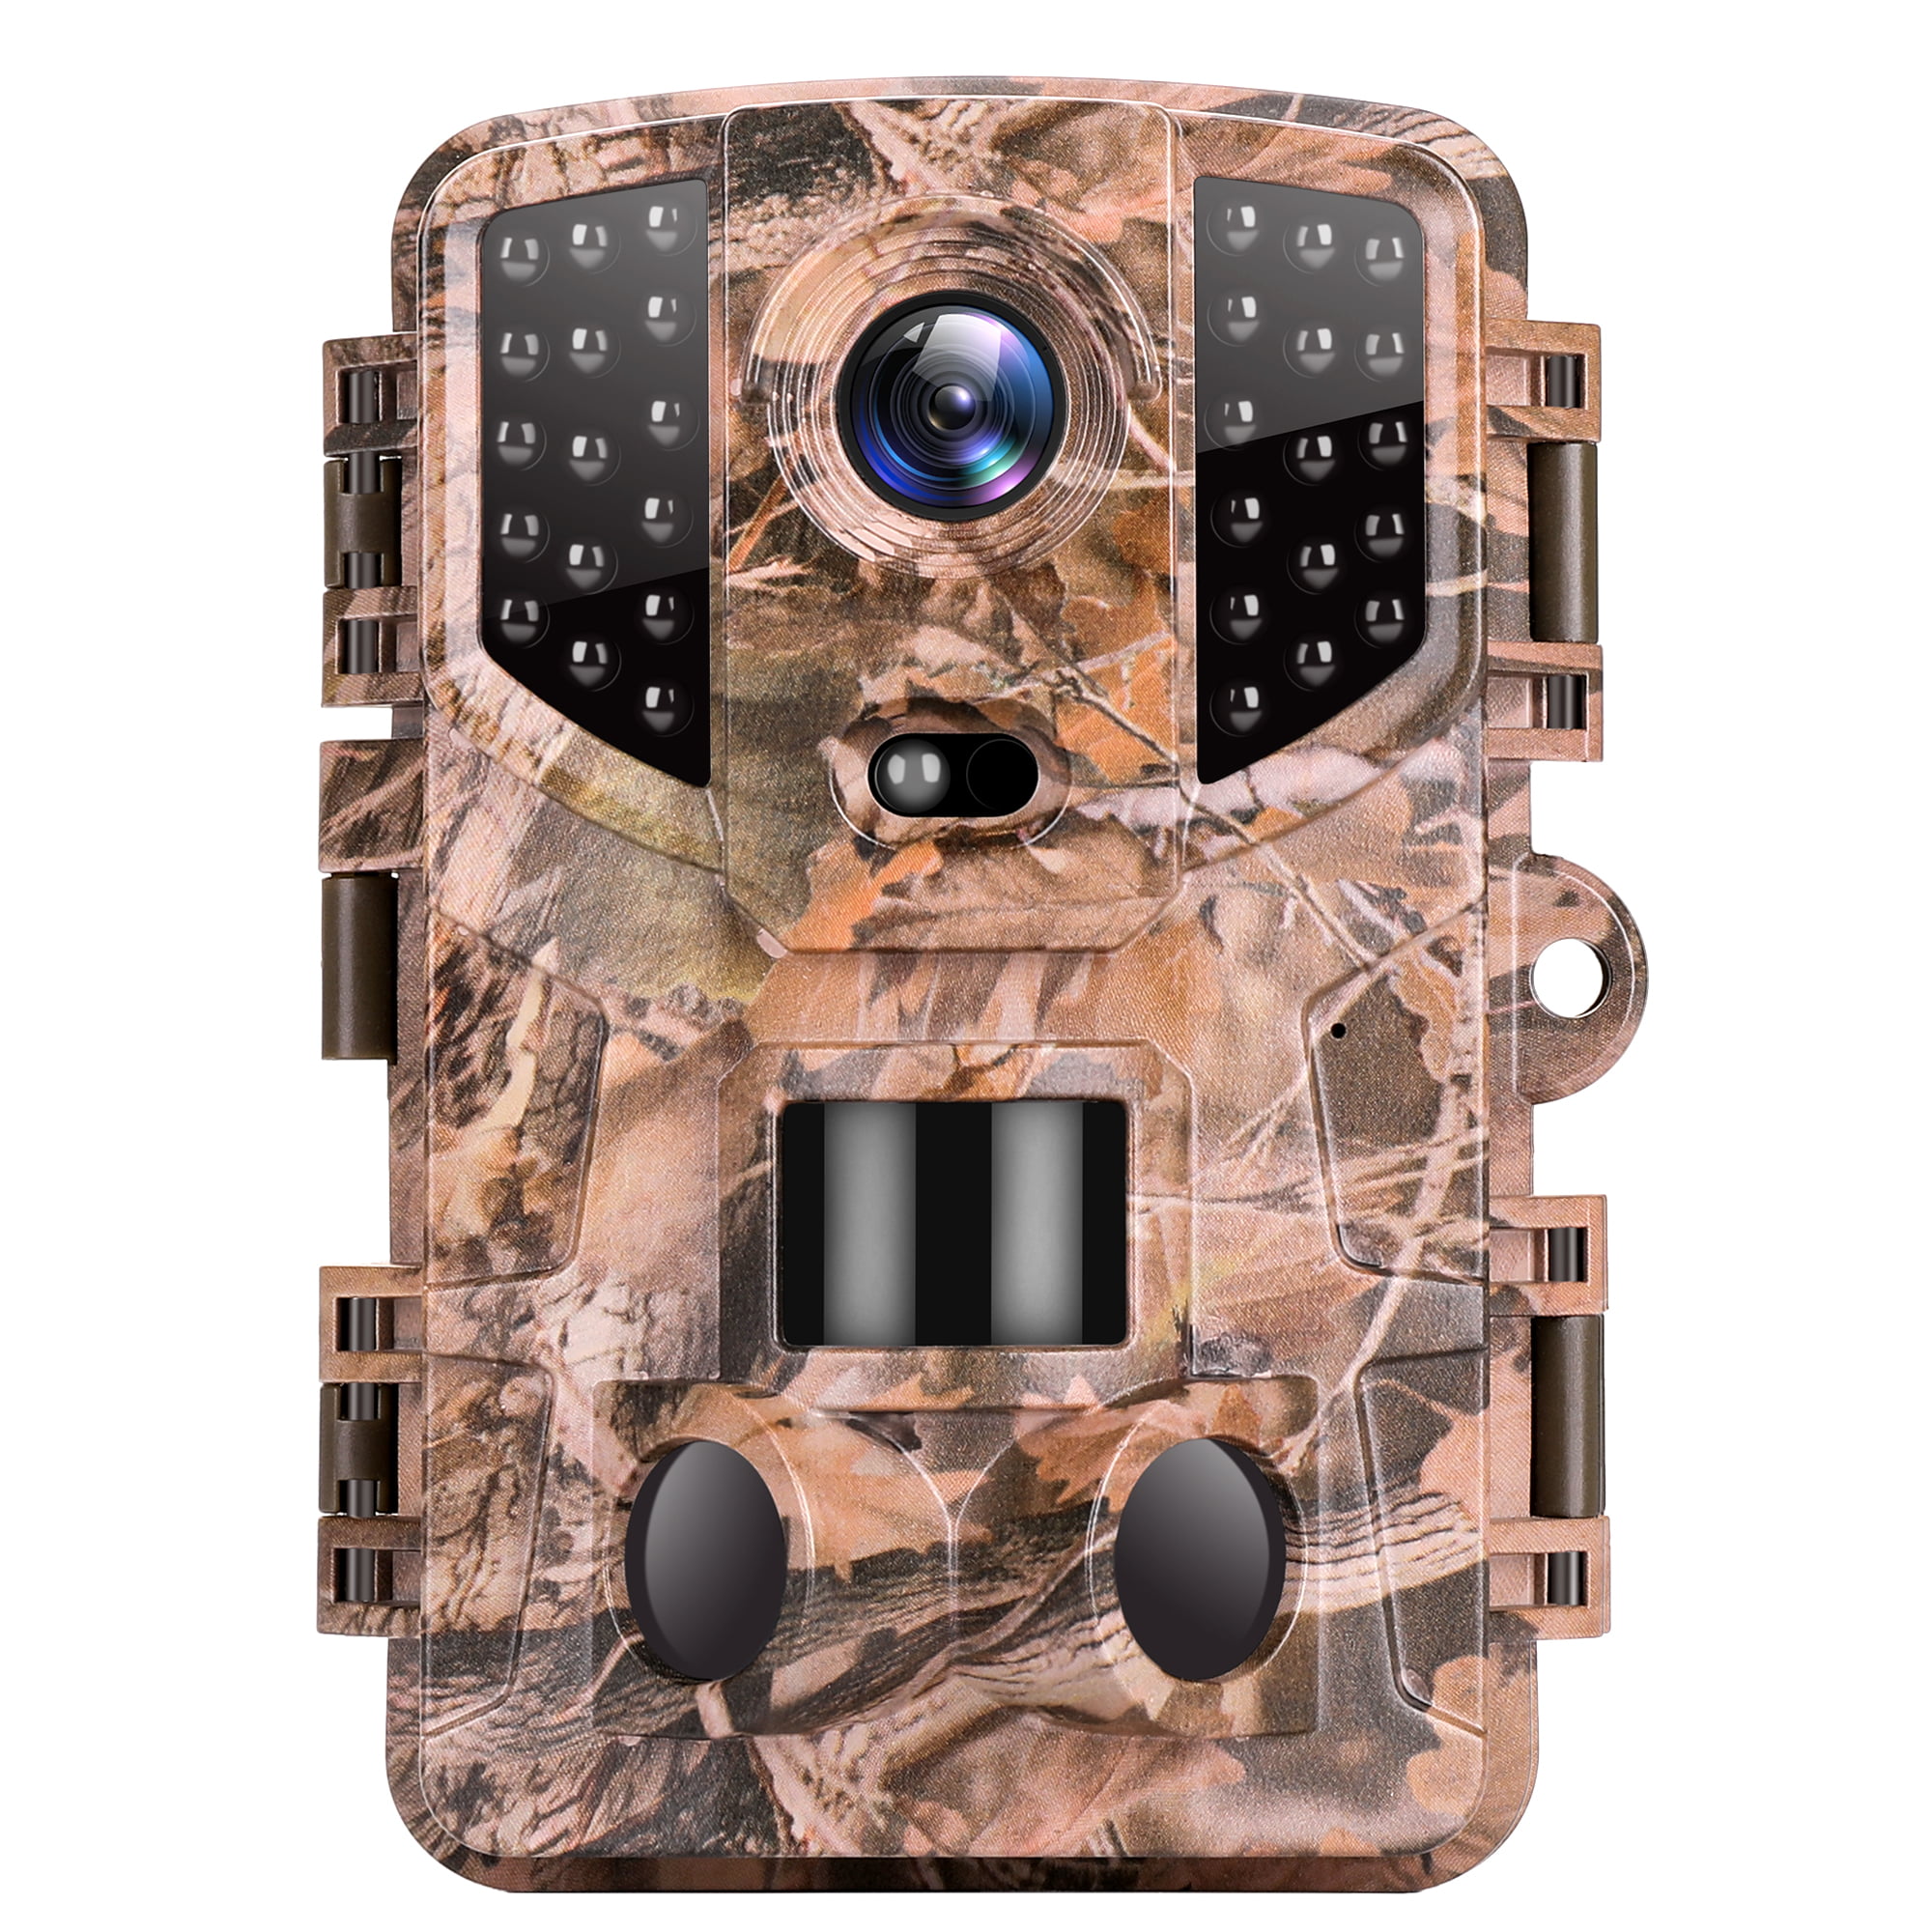 【2 Pack】 20Mp Trail Camera 1080P Game Camera with 3 PIR Sensors Motion Activated 